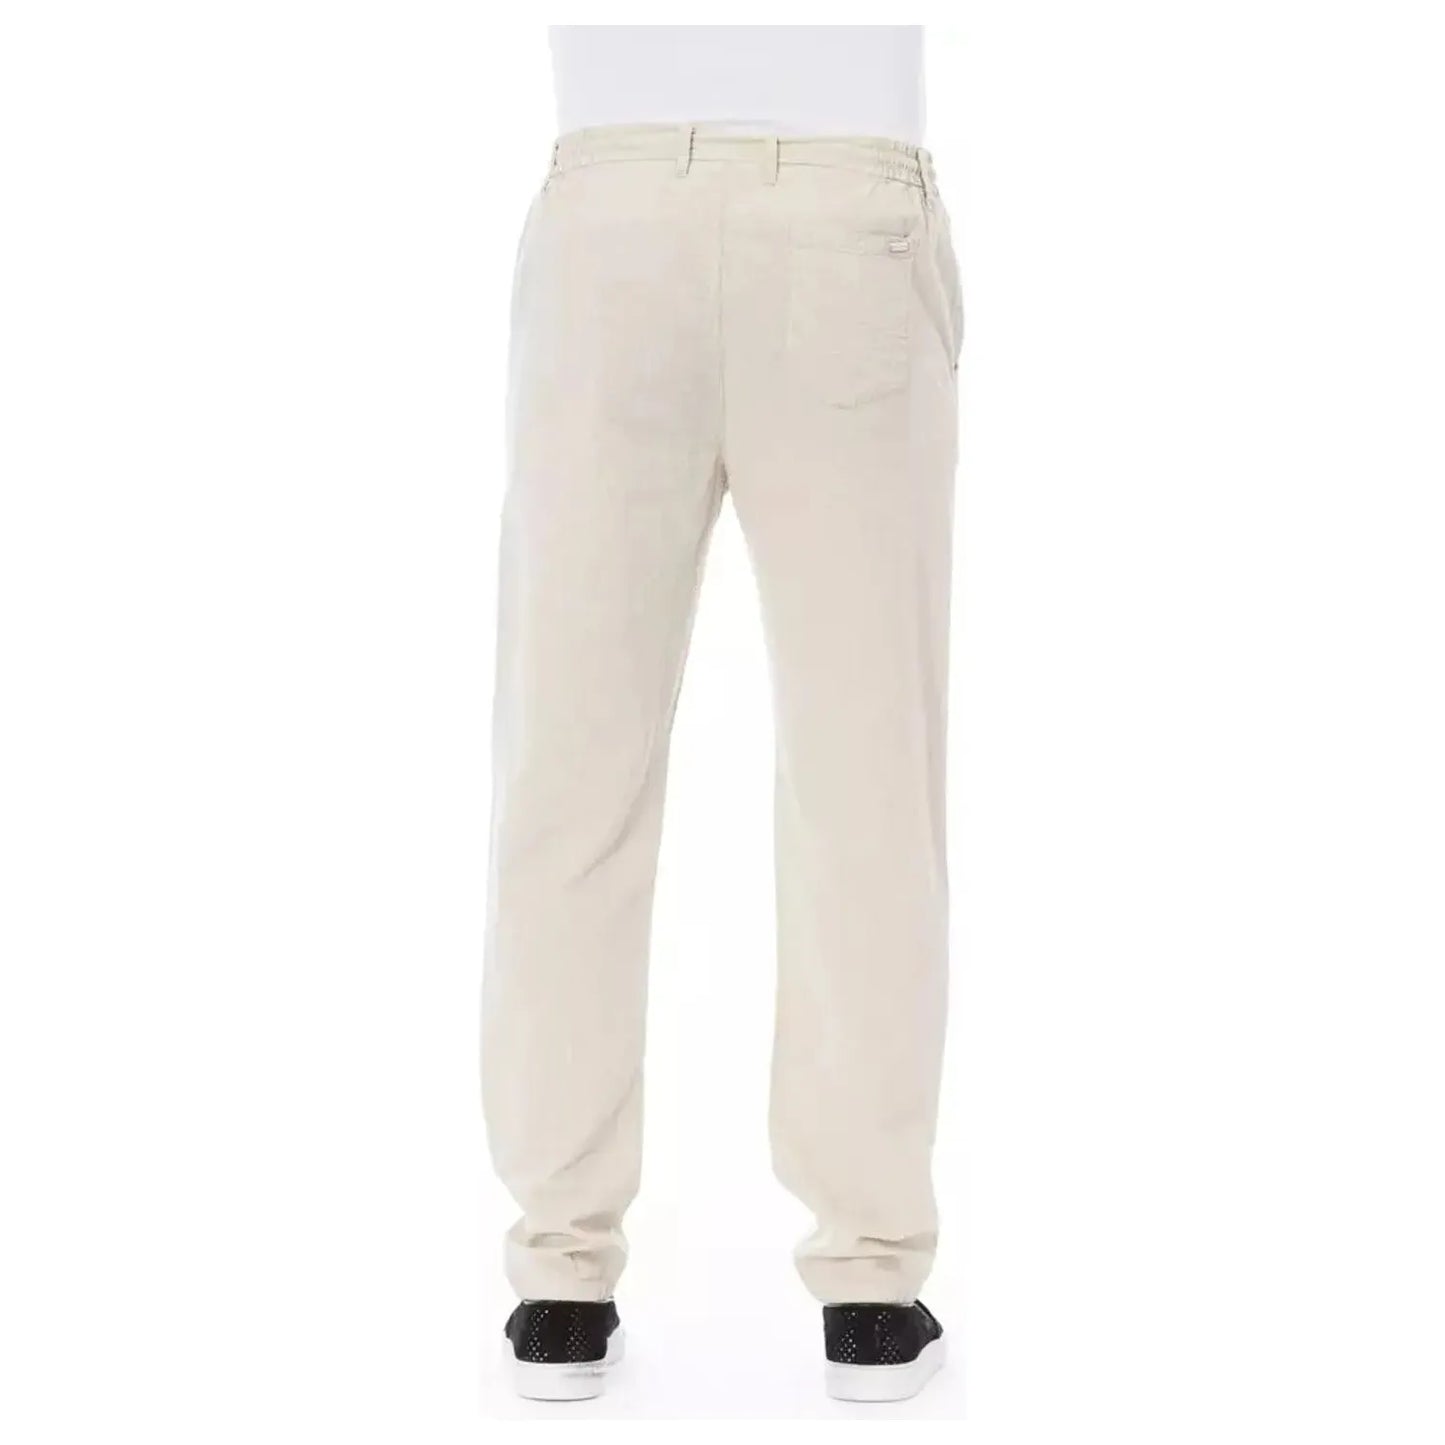 Baldinini Trend Chic Beige Cotton Chino Trousers with Drawstring beige-cotton-jeans-pant-17 product-23141-309099434-22-b0876dce-089.webp